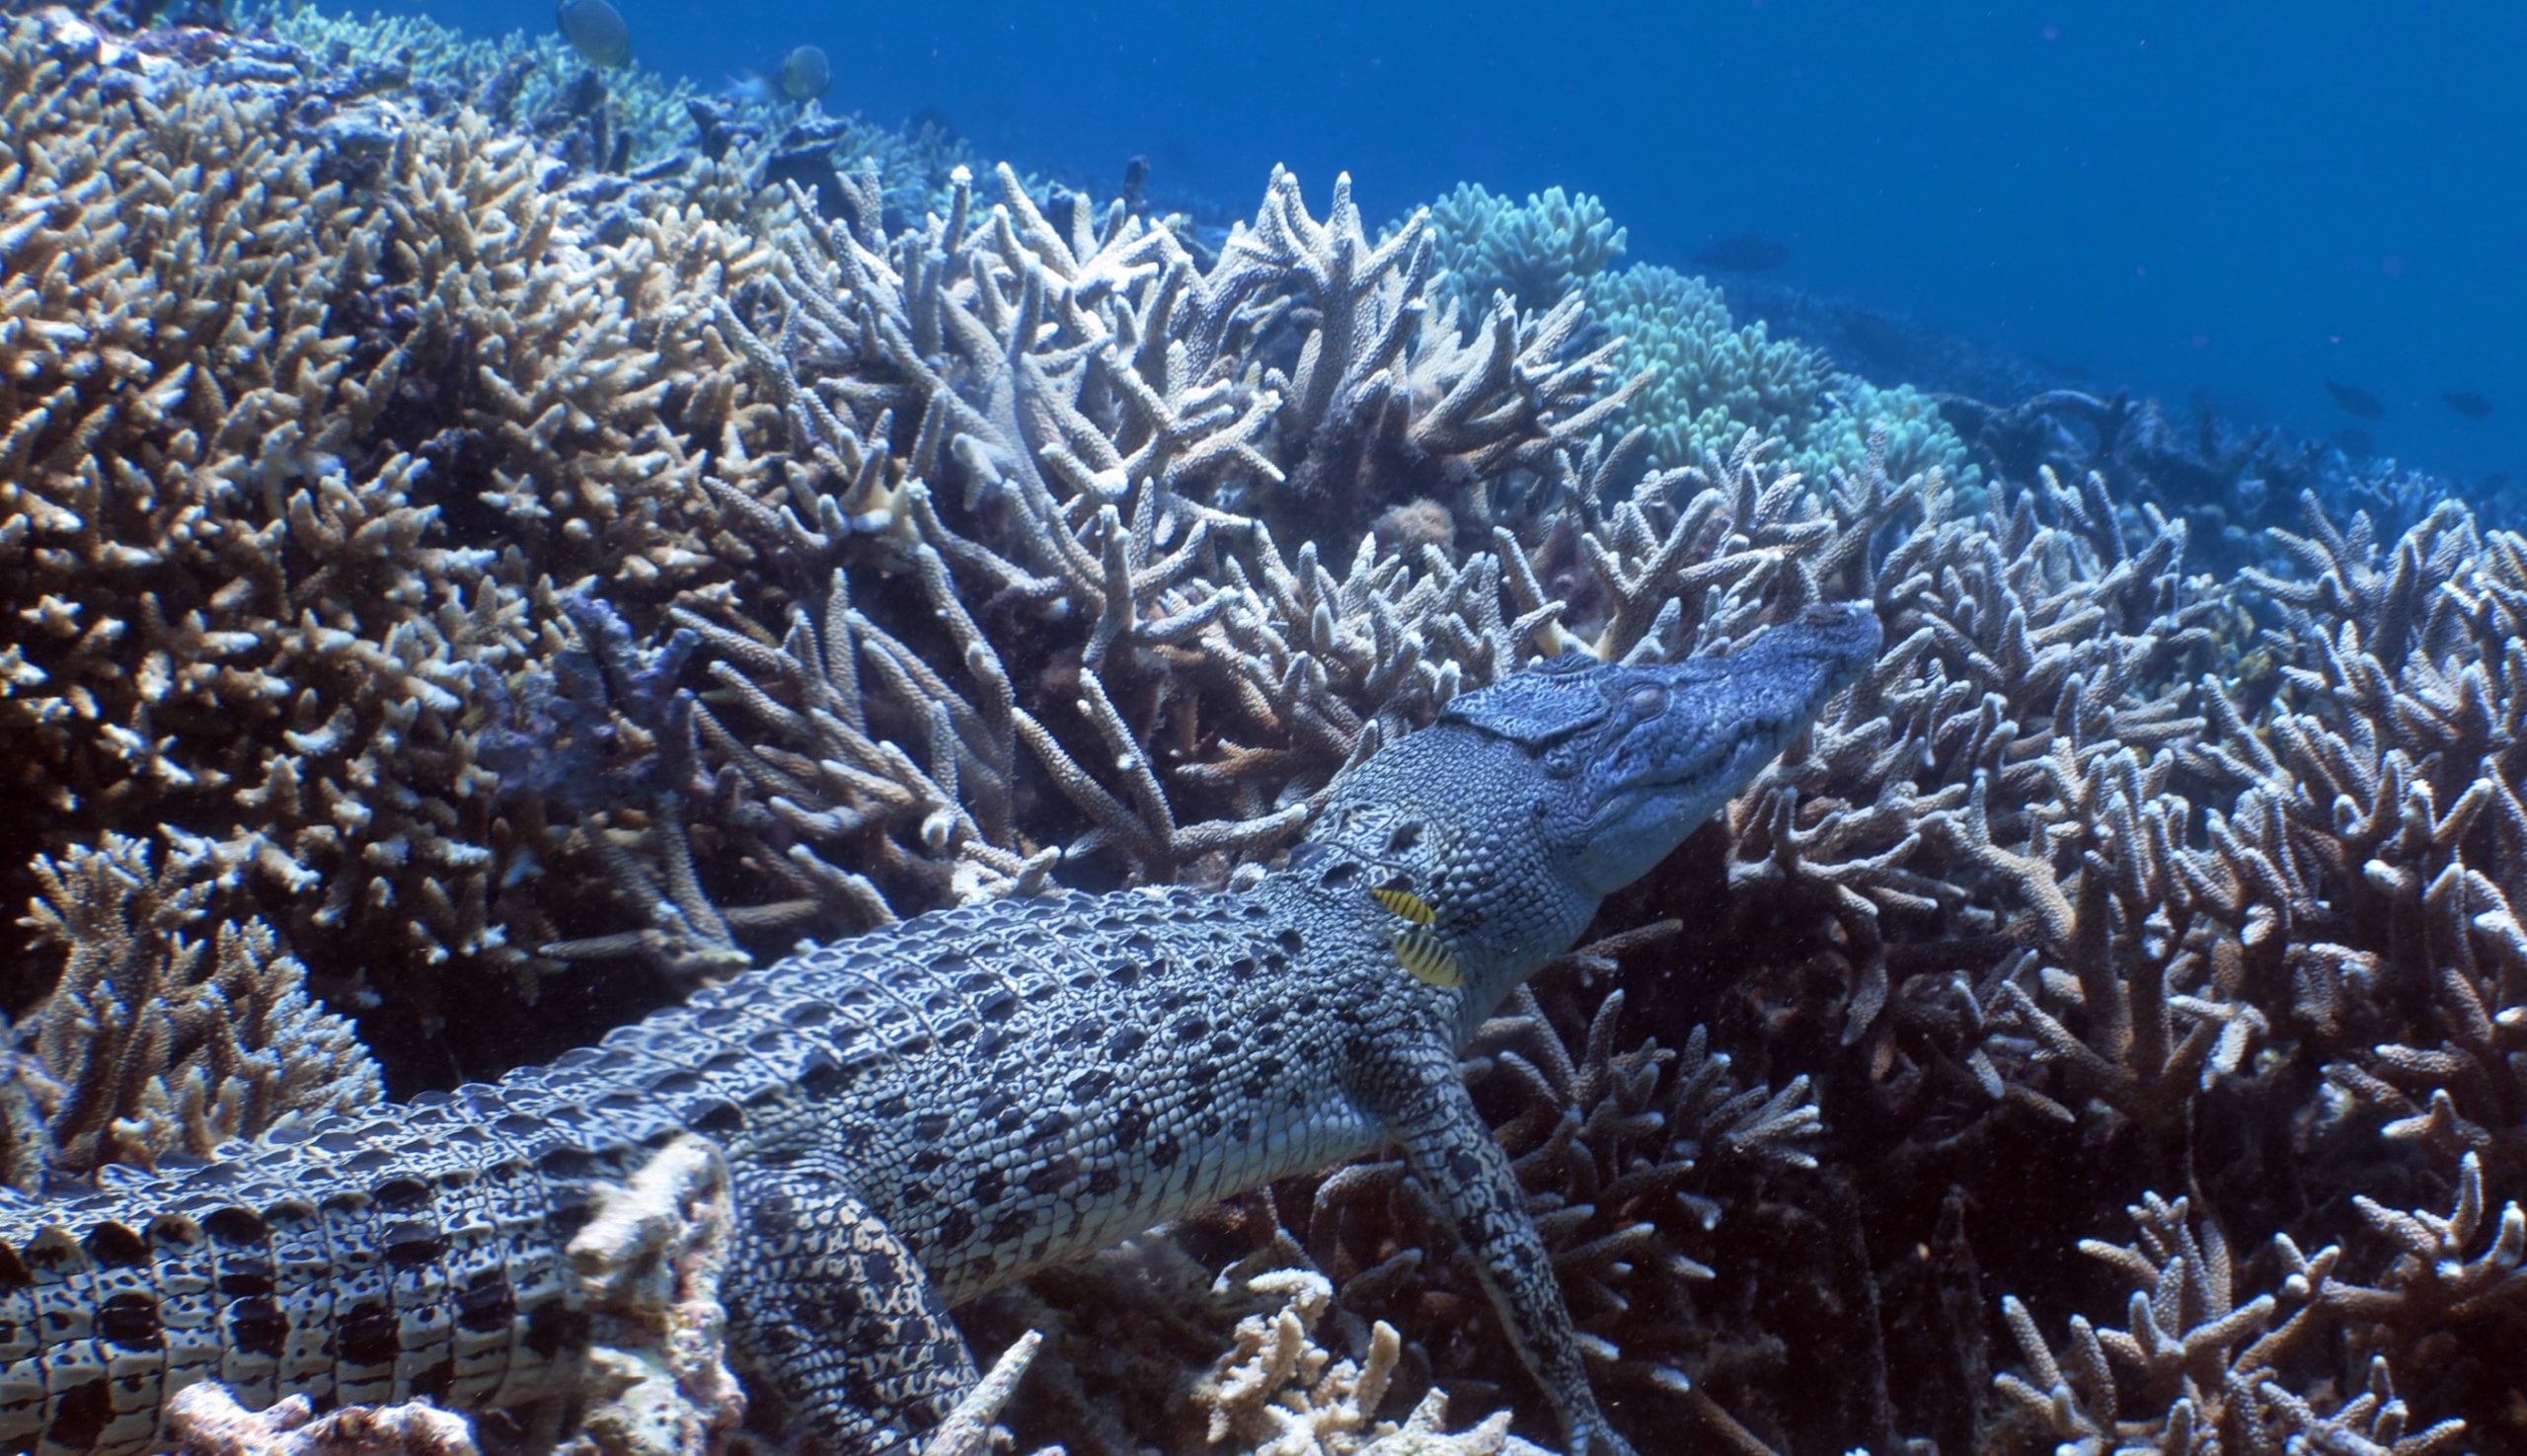 Are there crocodiles in the Great Barrier Reef?